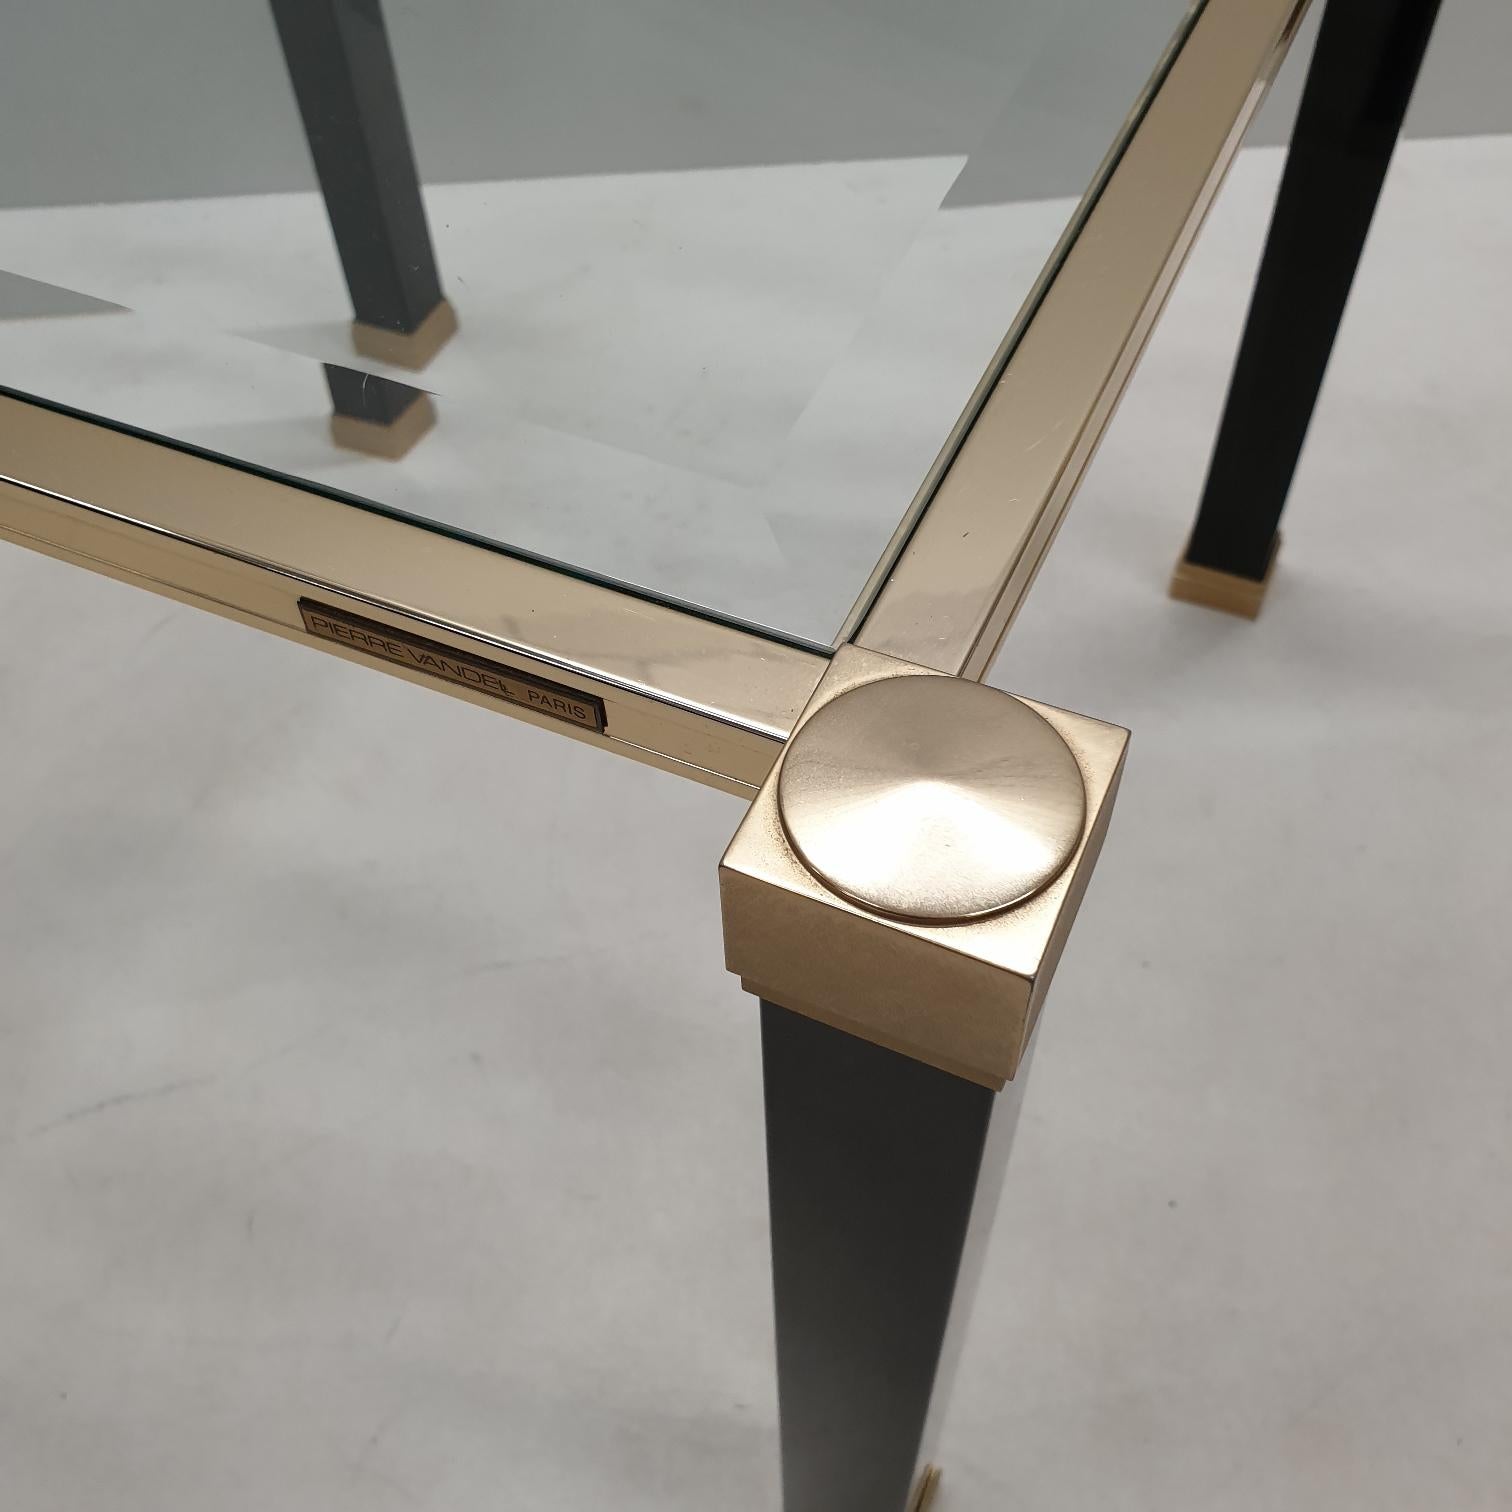 Pair of Brass 2-Tiers Square Site Tables by Pierre Vandel, 1980s, 1 Set of 2 For Sale 1